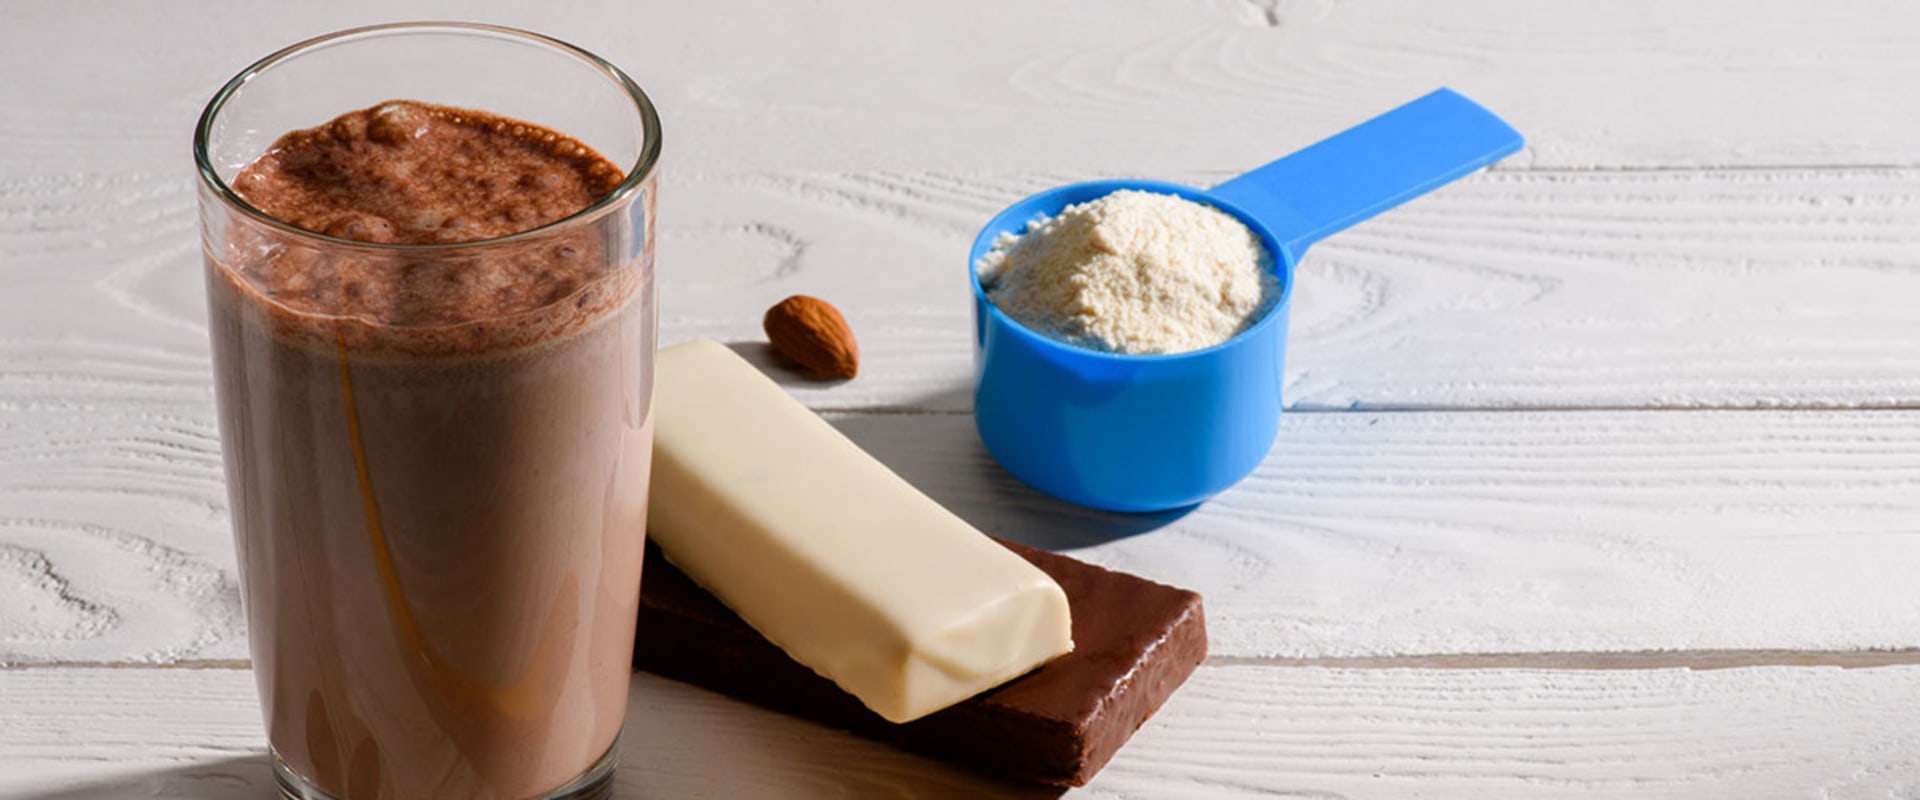 Is it good to drink protein powder everyday?